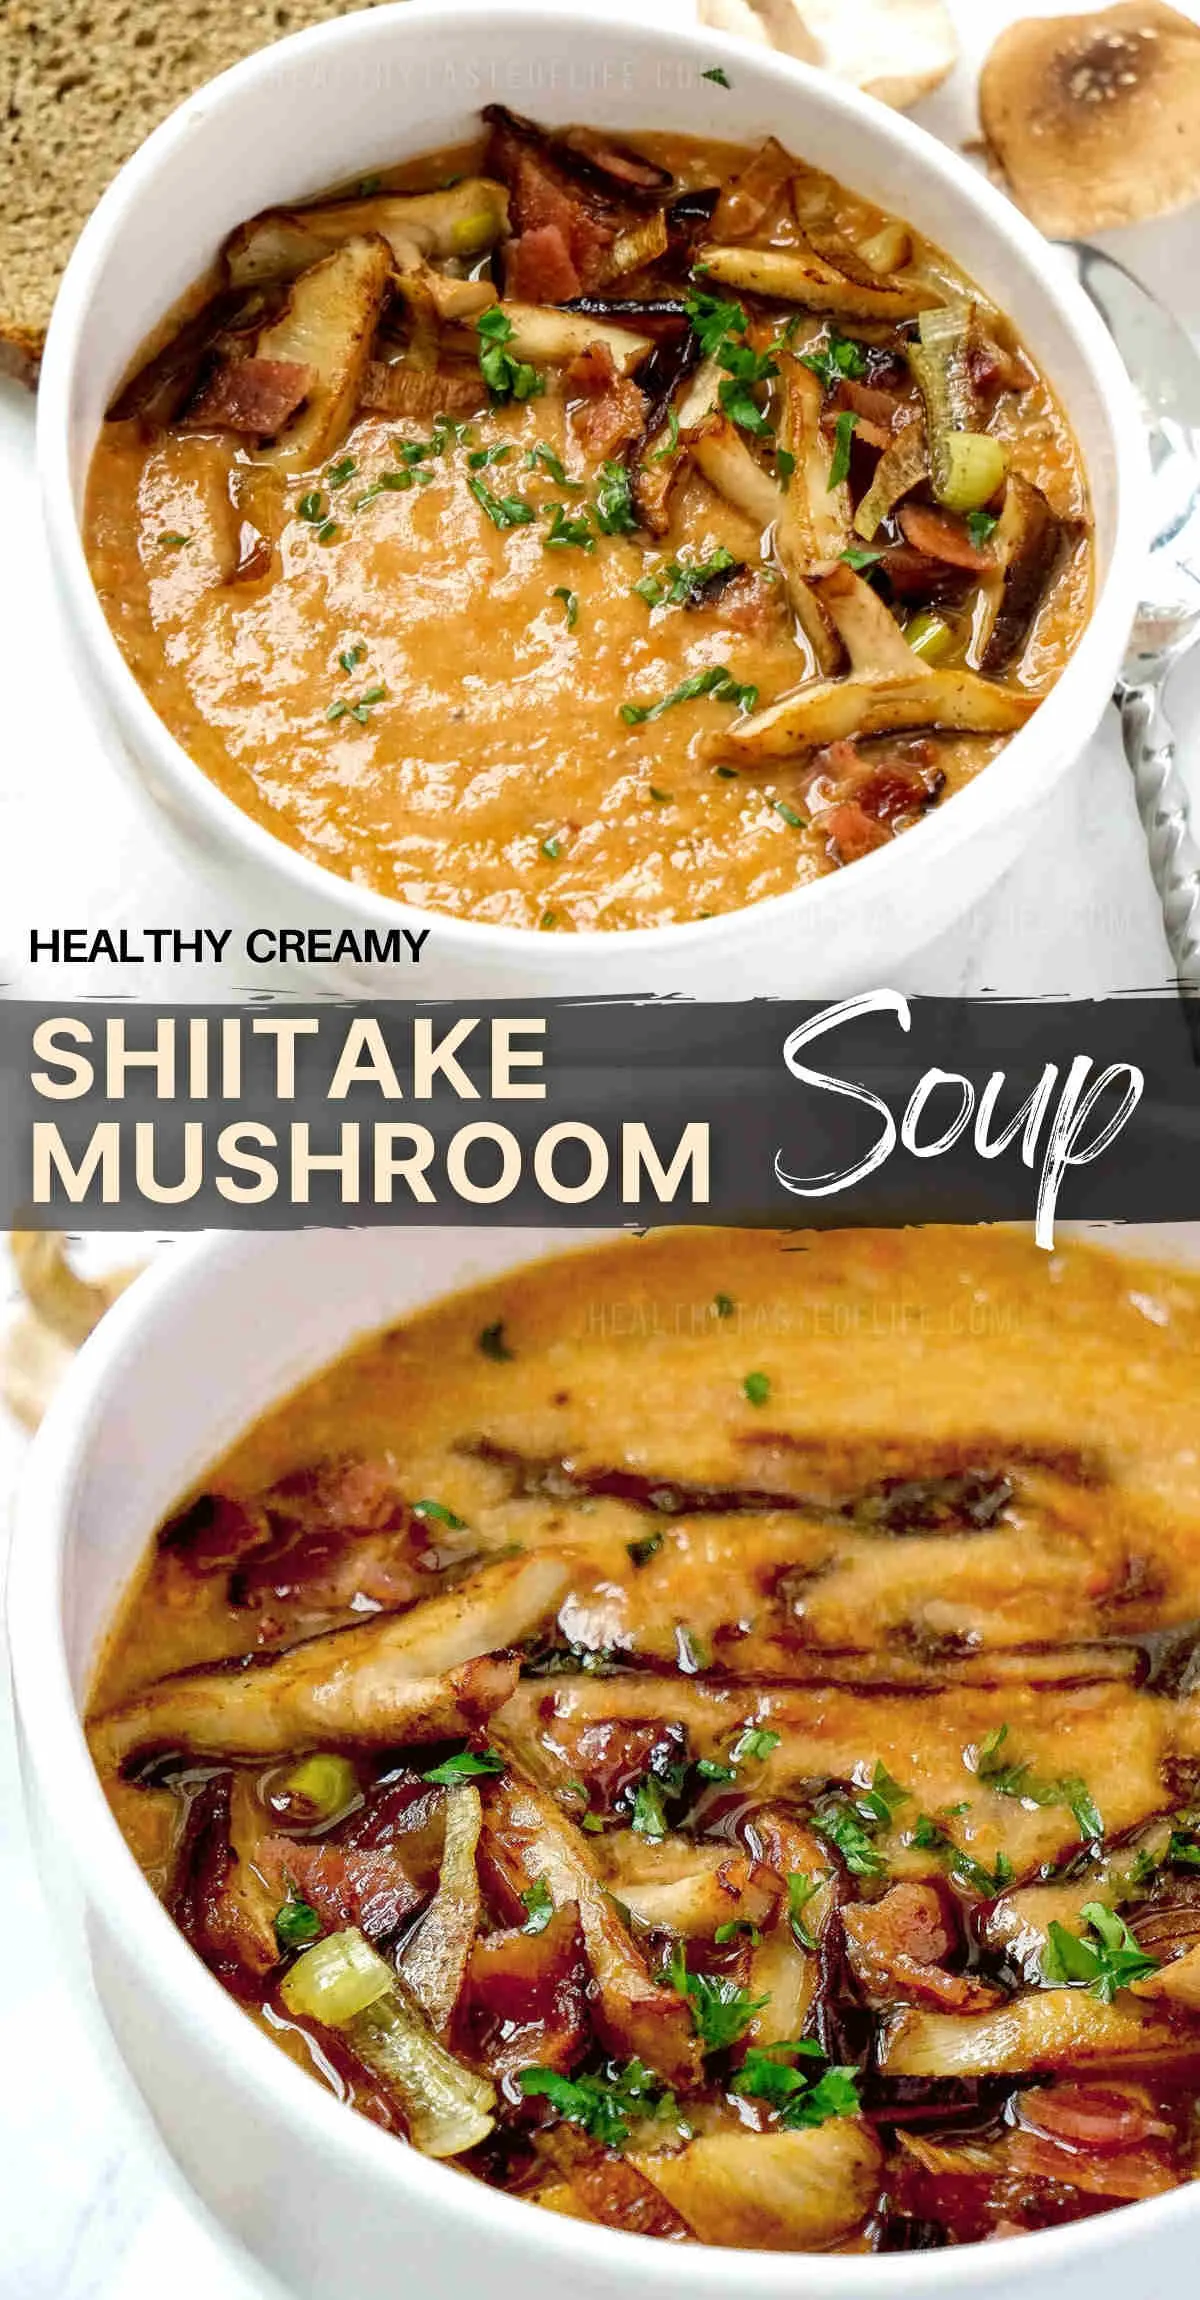 Healthy creamy shiitake mushroom soup recipe, dairy free no cream required. This healthy shiitake mushroom soup is made with immune boosting shiitake mushrooms, veggies and thickened with chickpeas. It can also be easy transformed into a healthy vegan shiitake mushroom soup recipe #mushroomsoup #dairyfree  #healthy #shiitake #soup #creamy